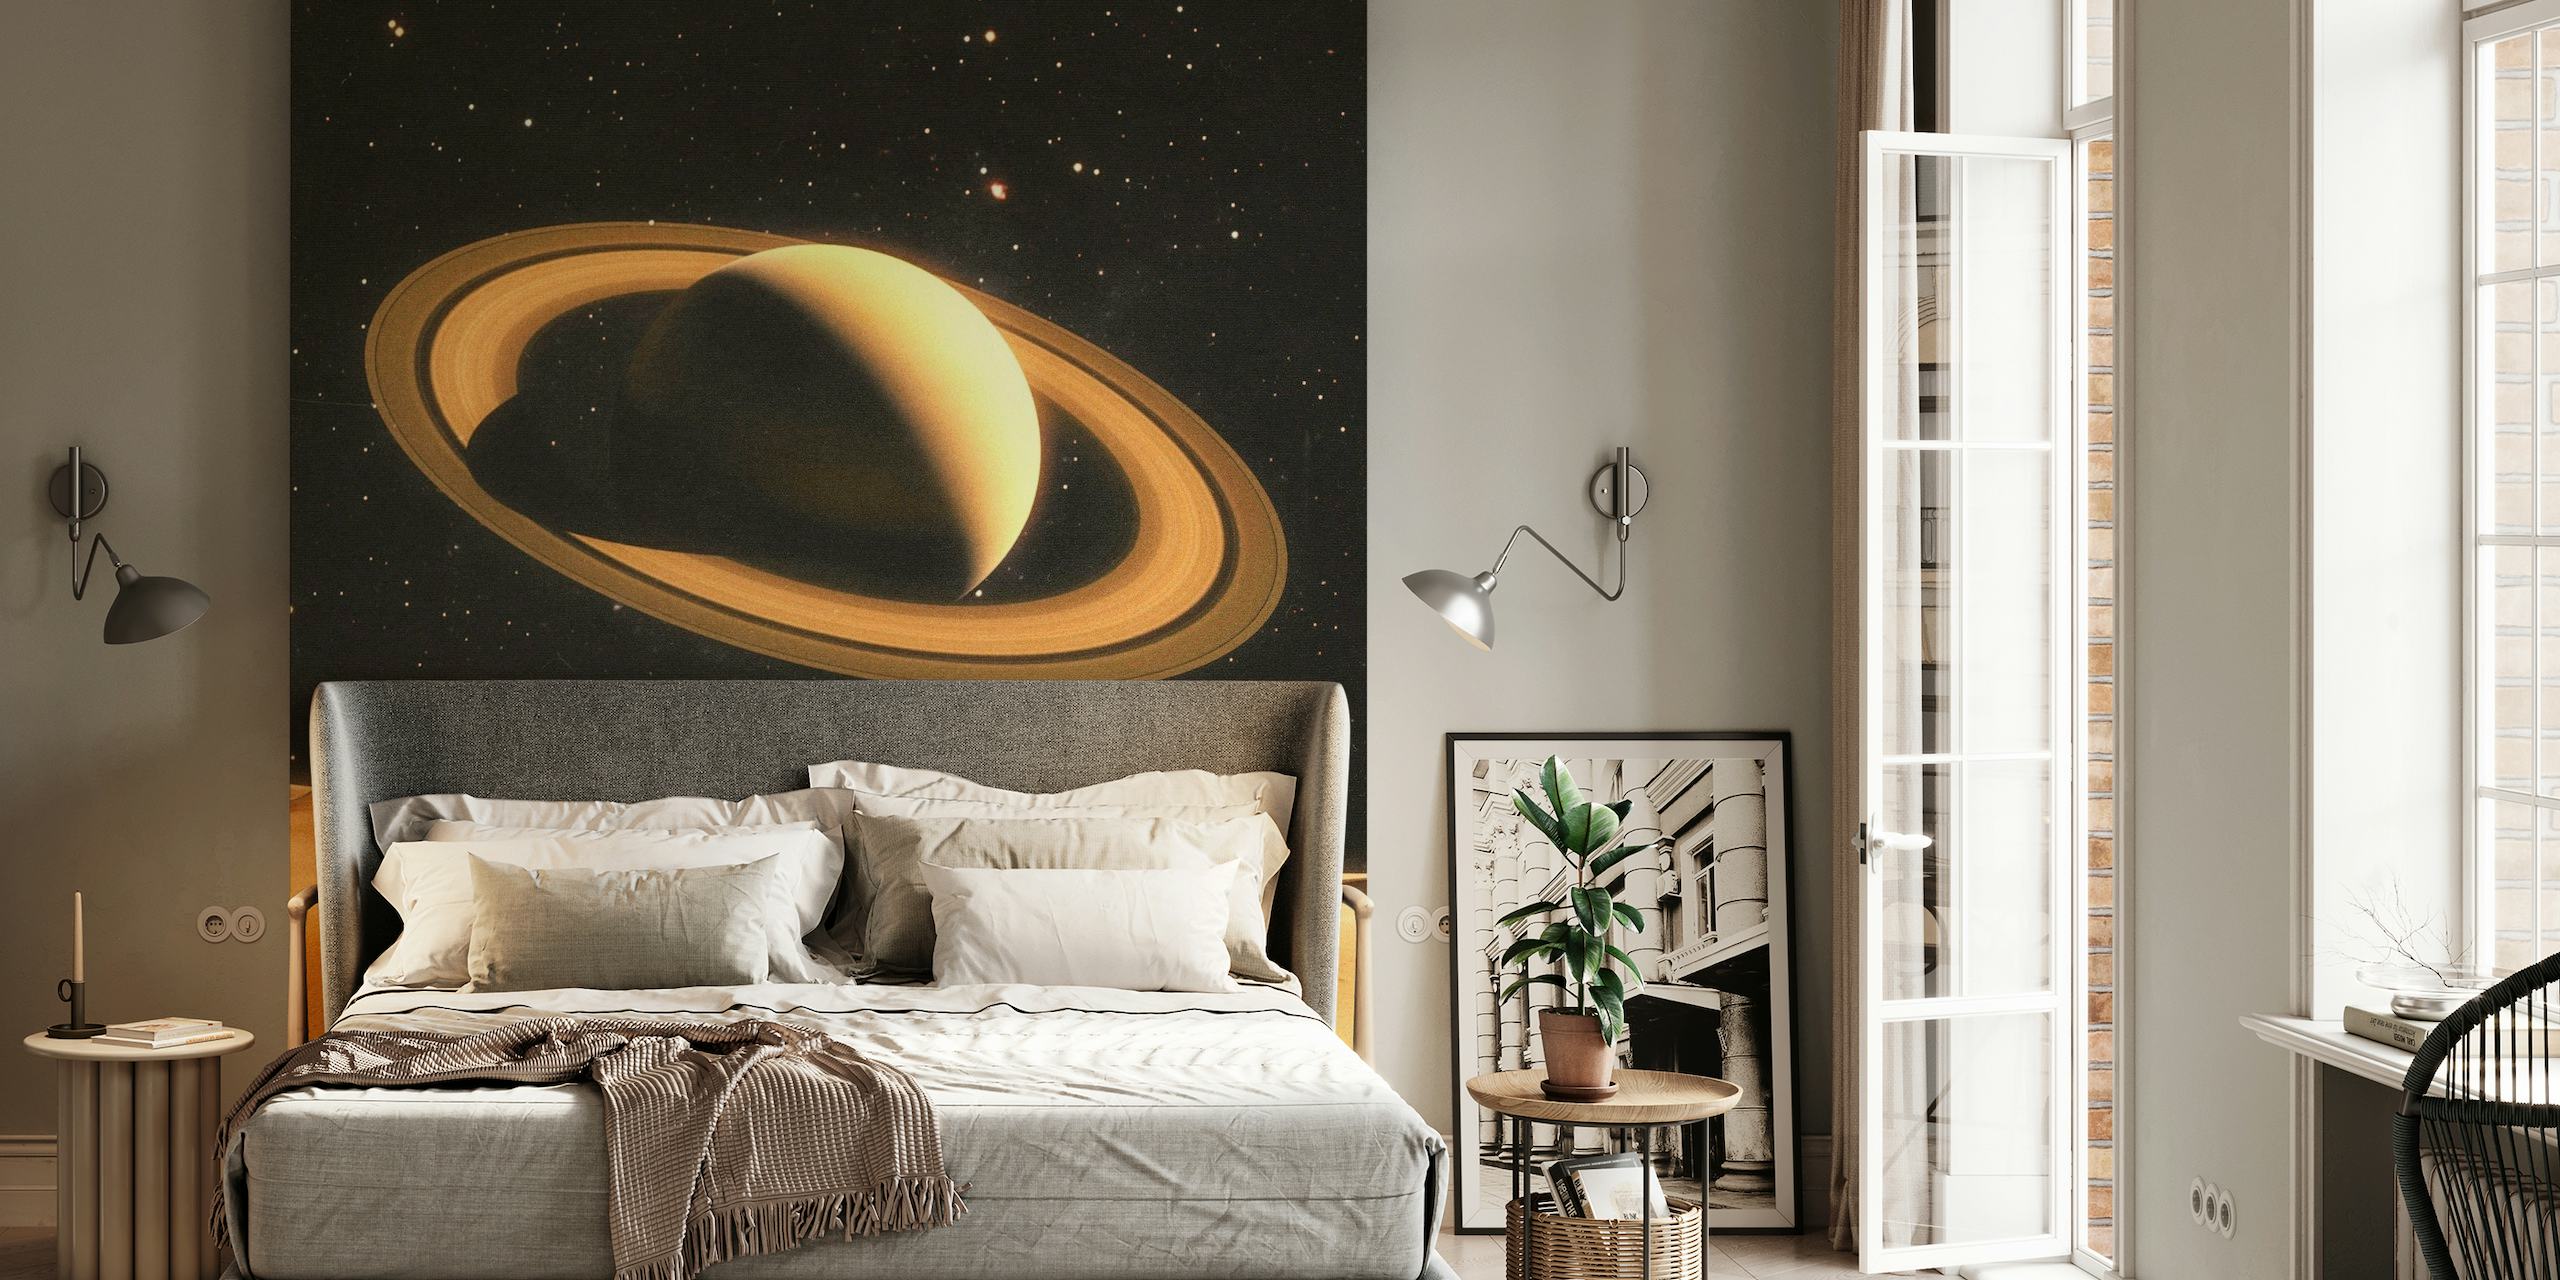 Wall mural of two people on a desert-like planet with Saturn in the background